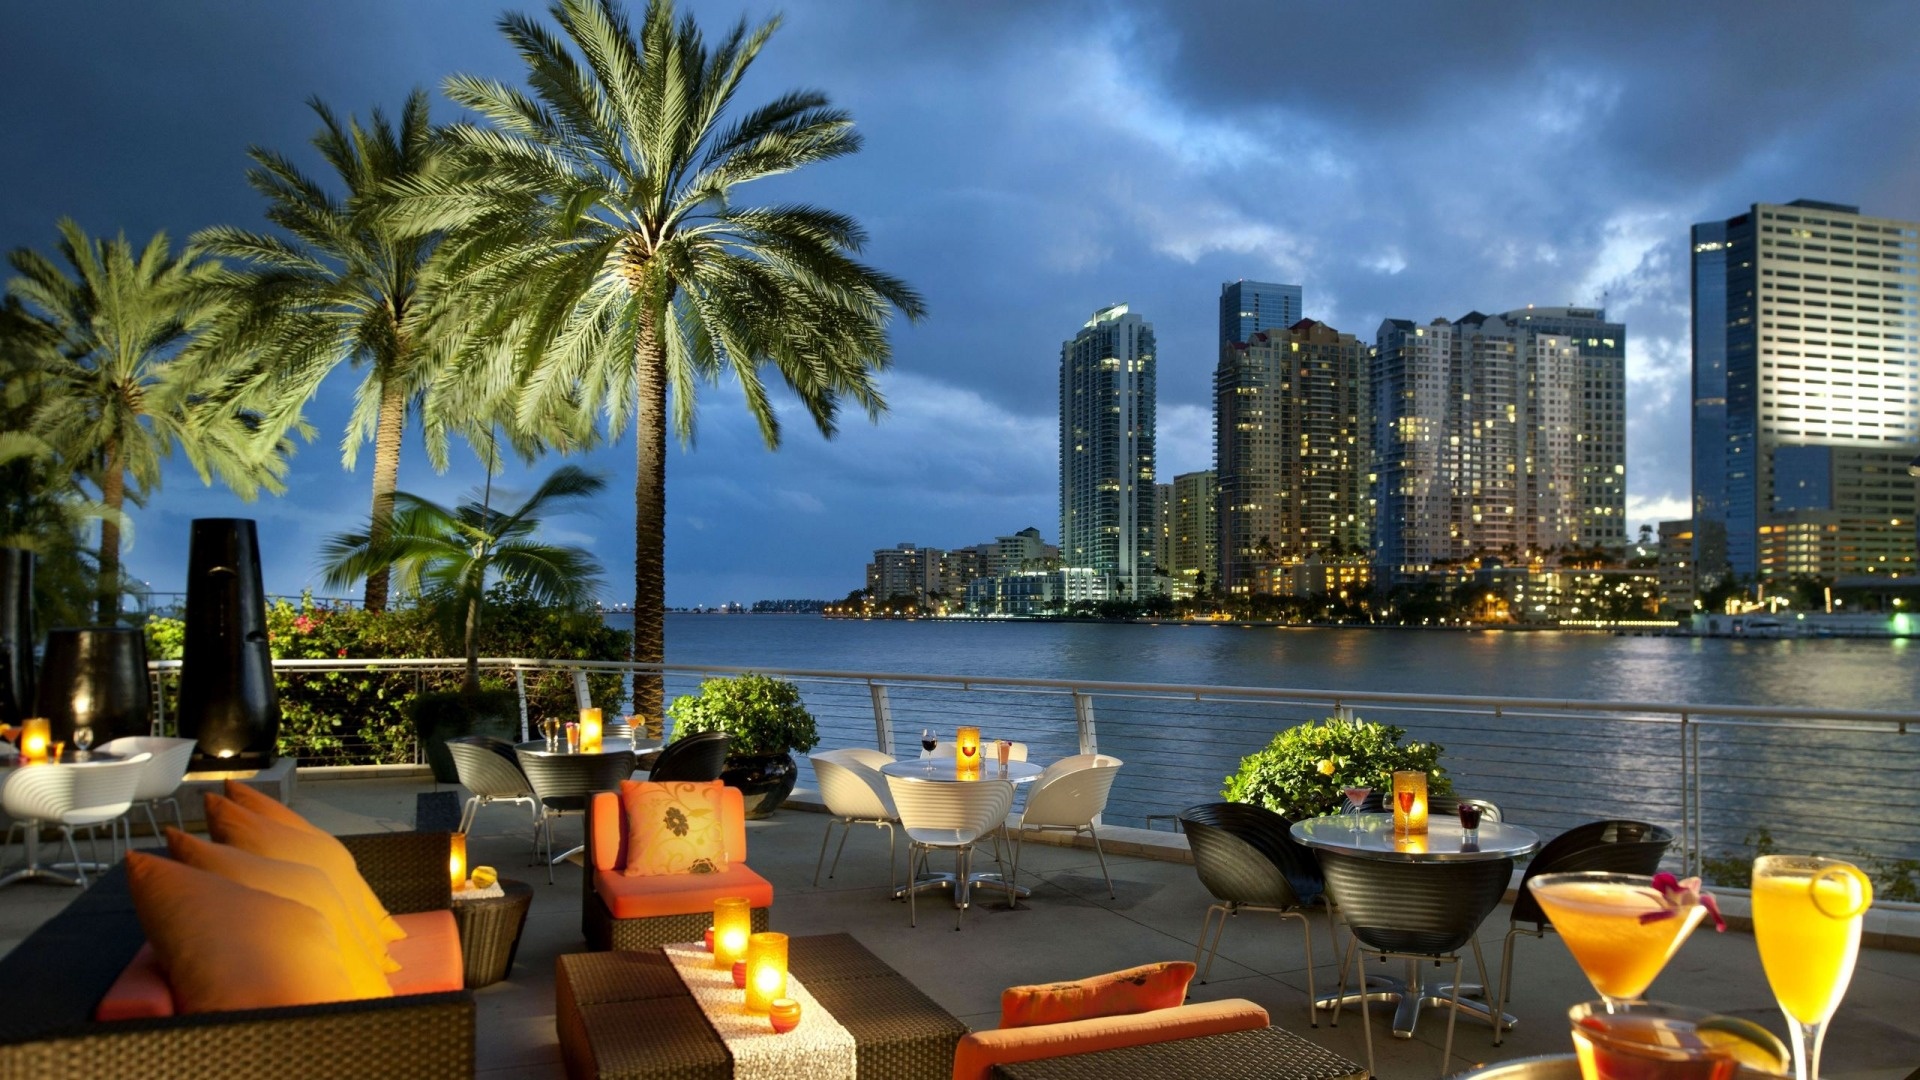 evening, light, miami, man made, terrace, chair, city, cocktail, drink, palm tree HD wallpaper